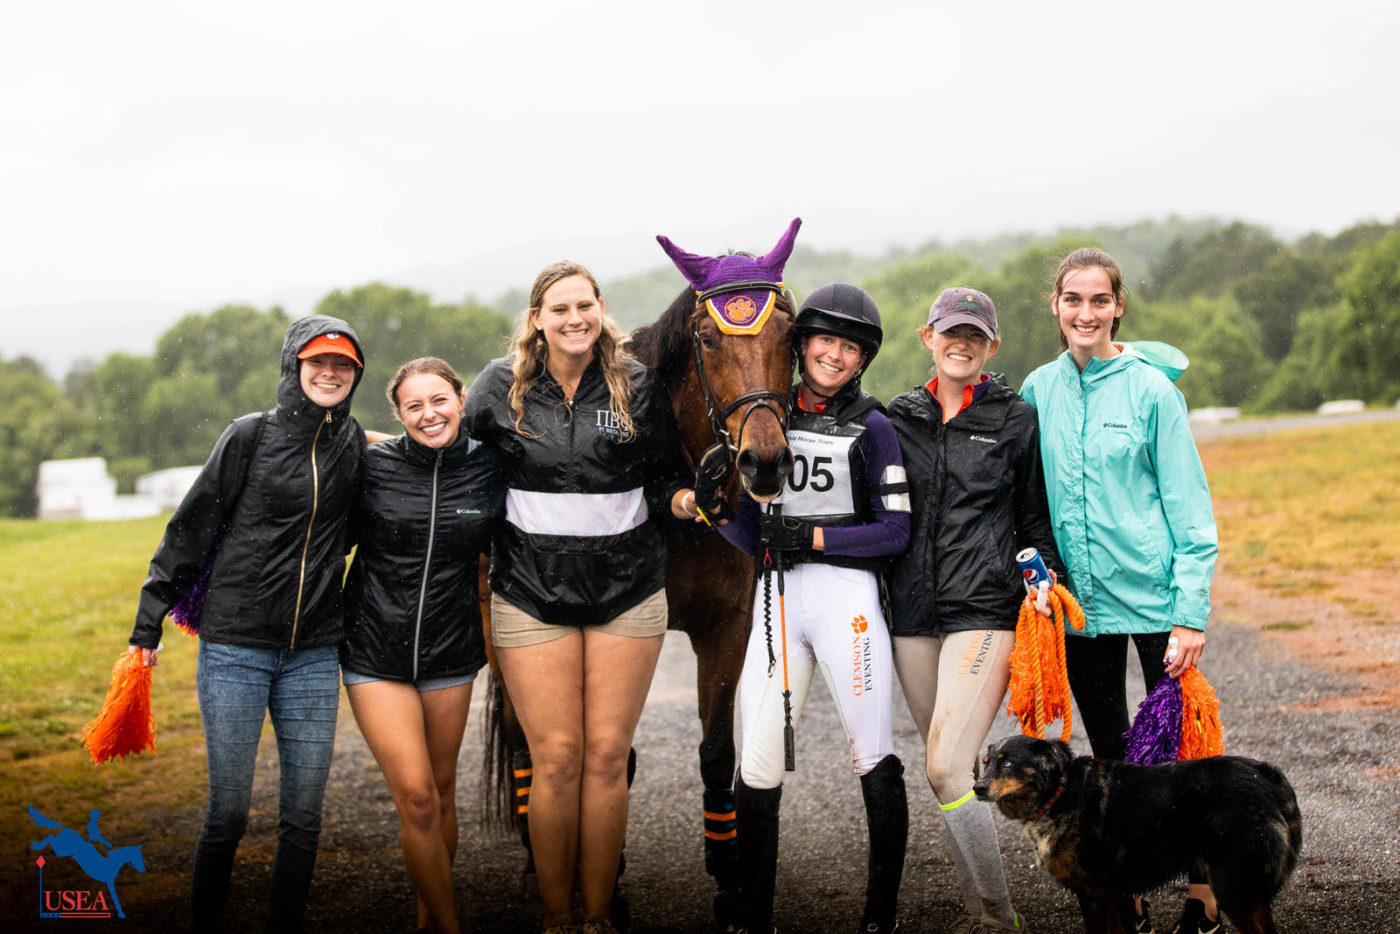 Clemson came out in top form to cheer their teammates on. USEA/Kim Beaudoin photo